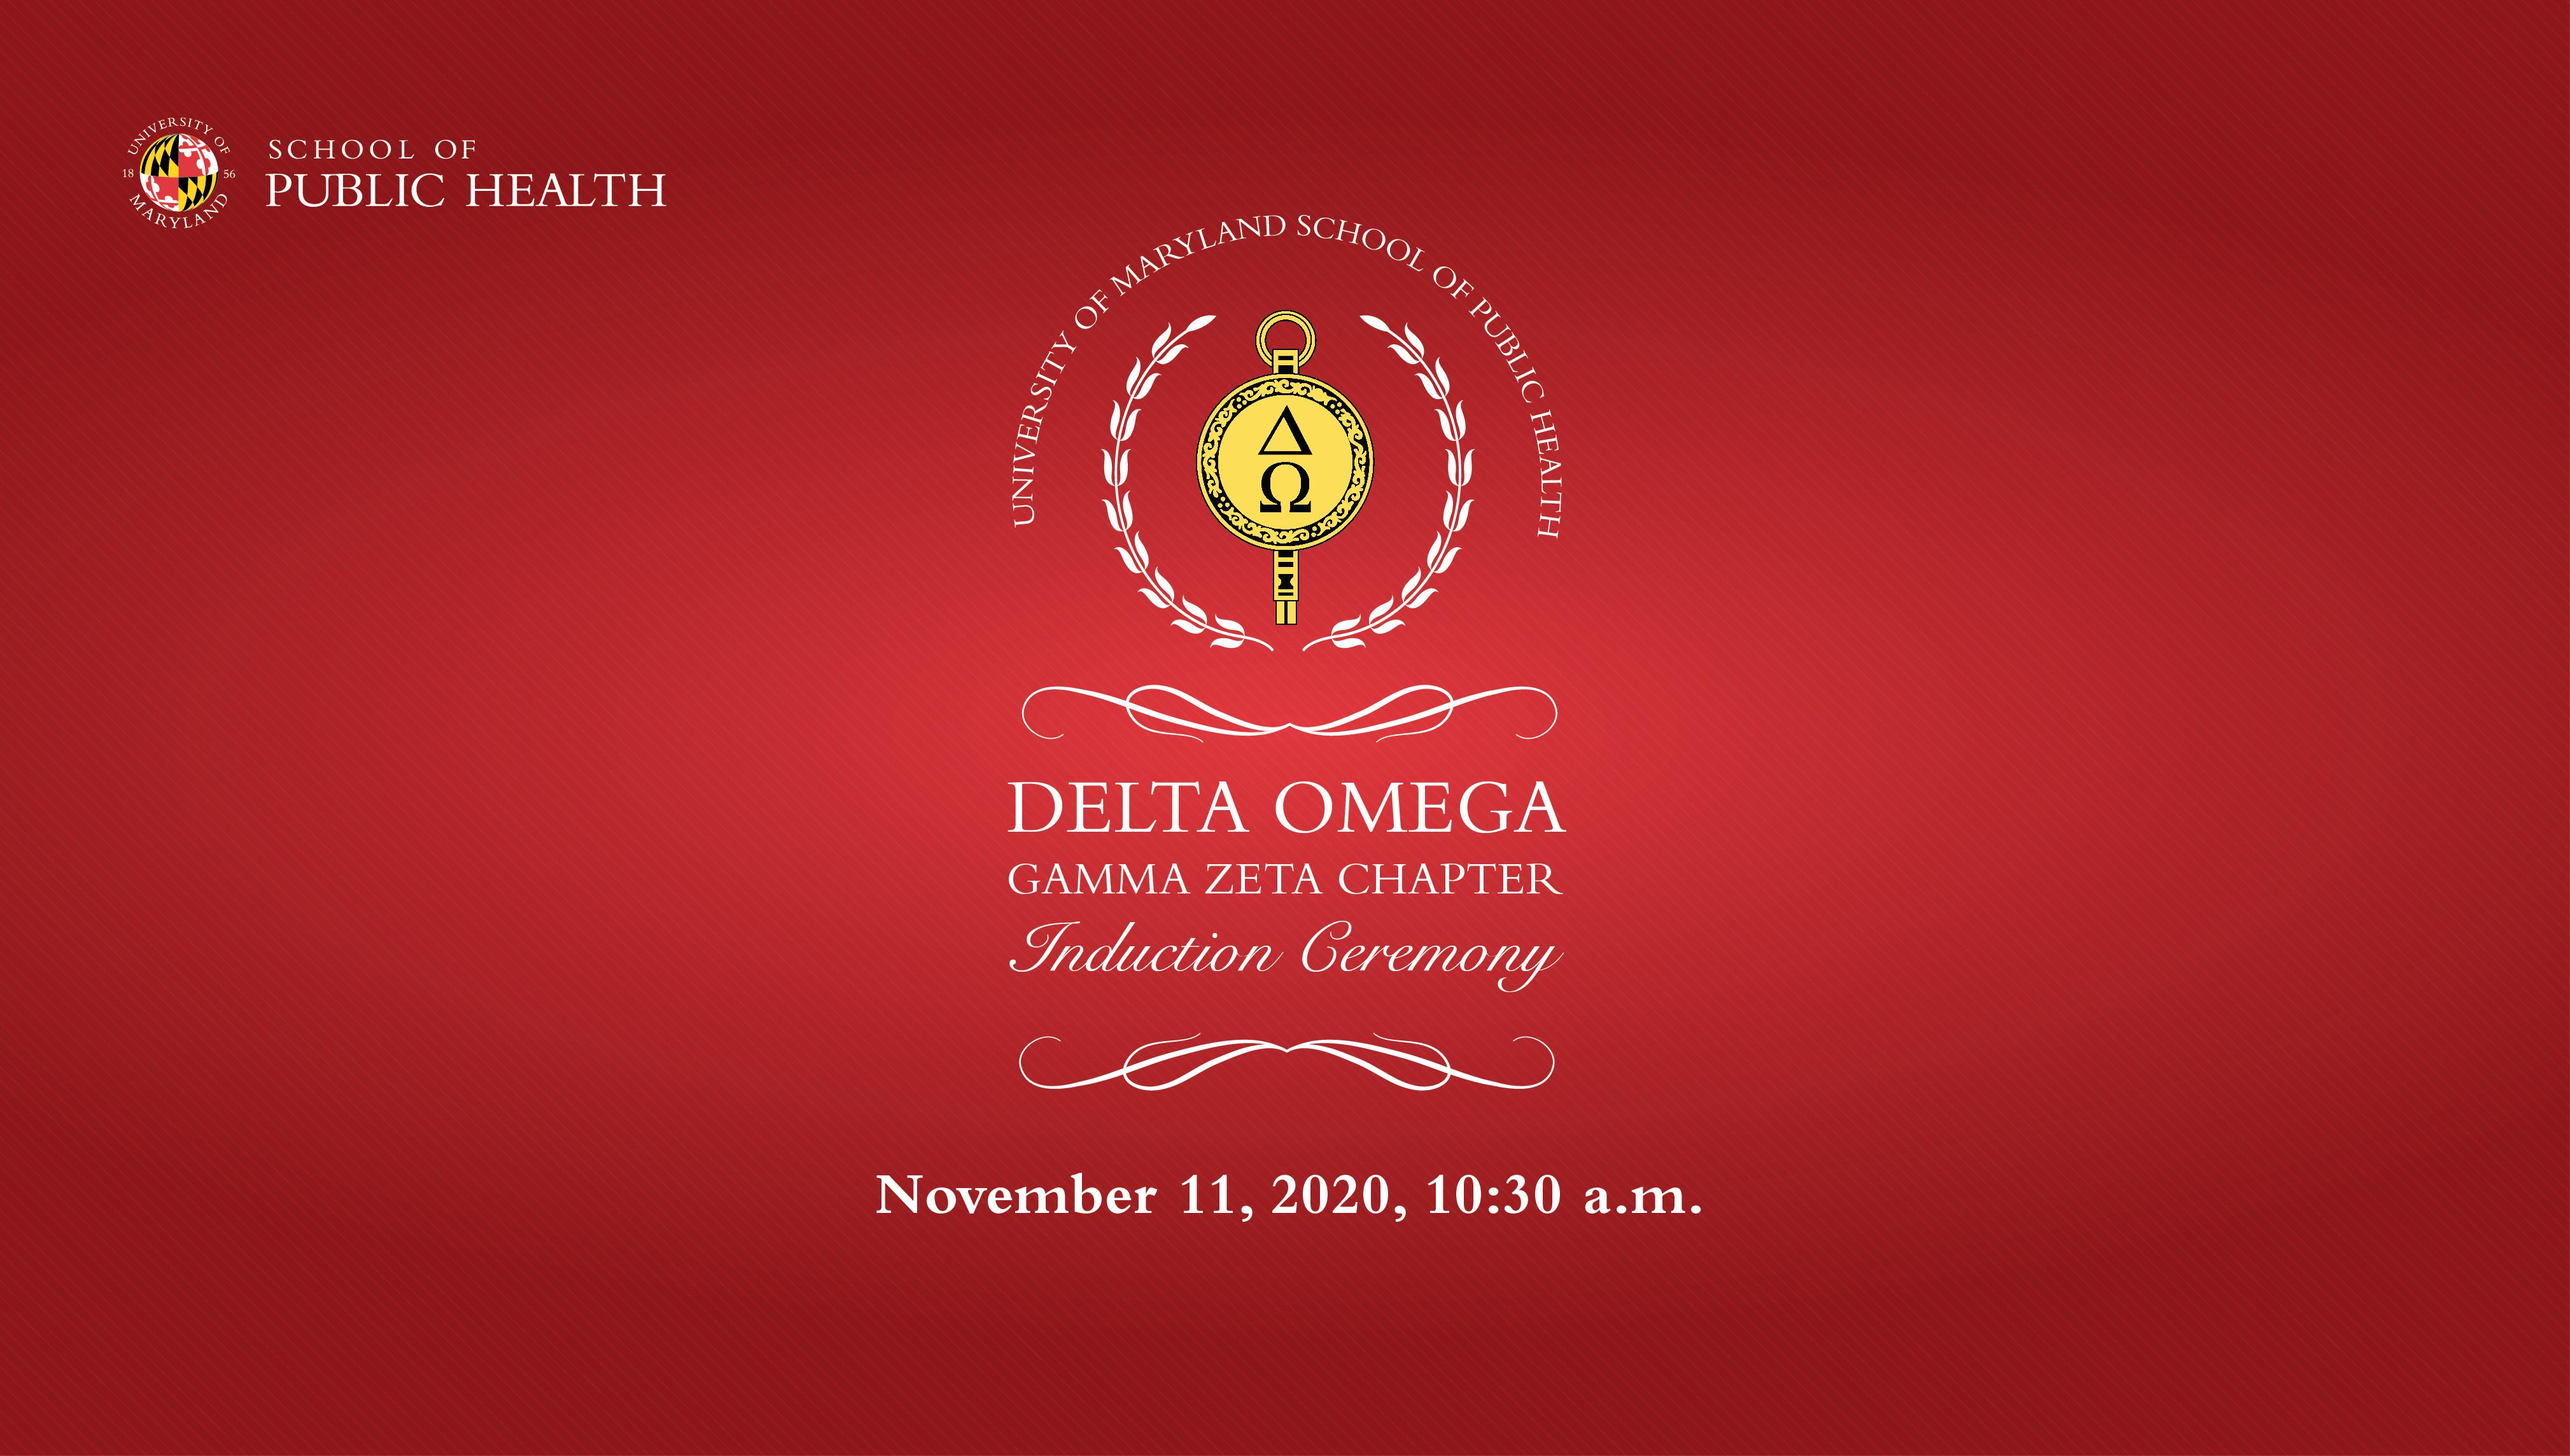 Delta Omega 2020 induction ceremony from the University of Maryland